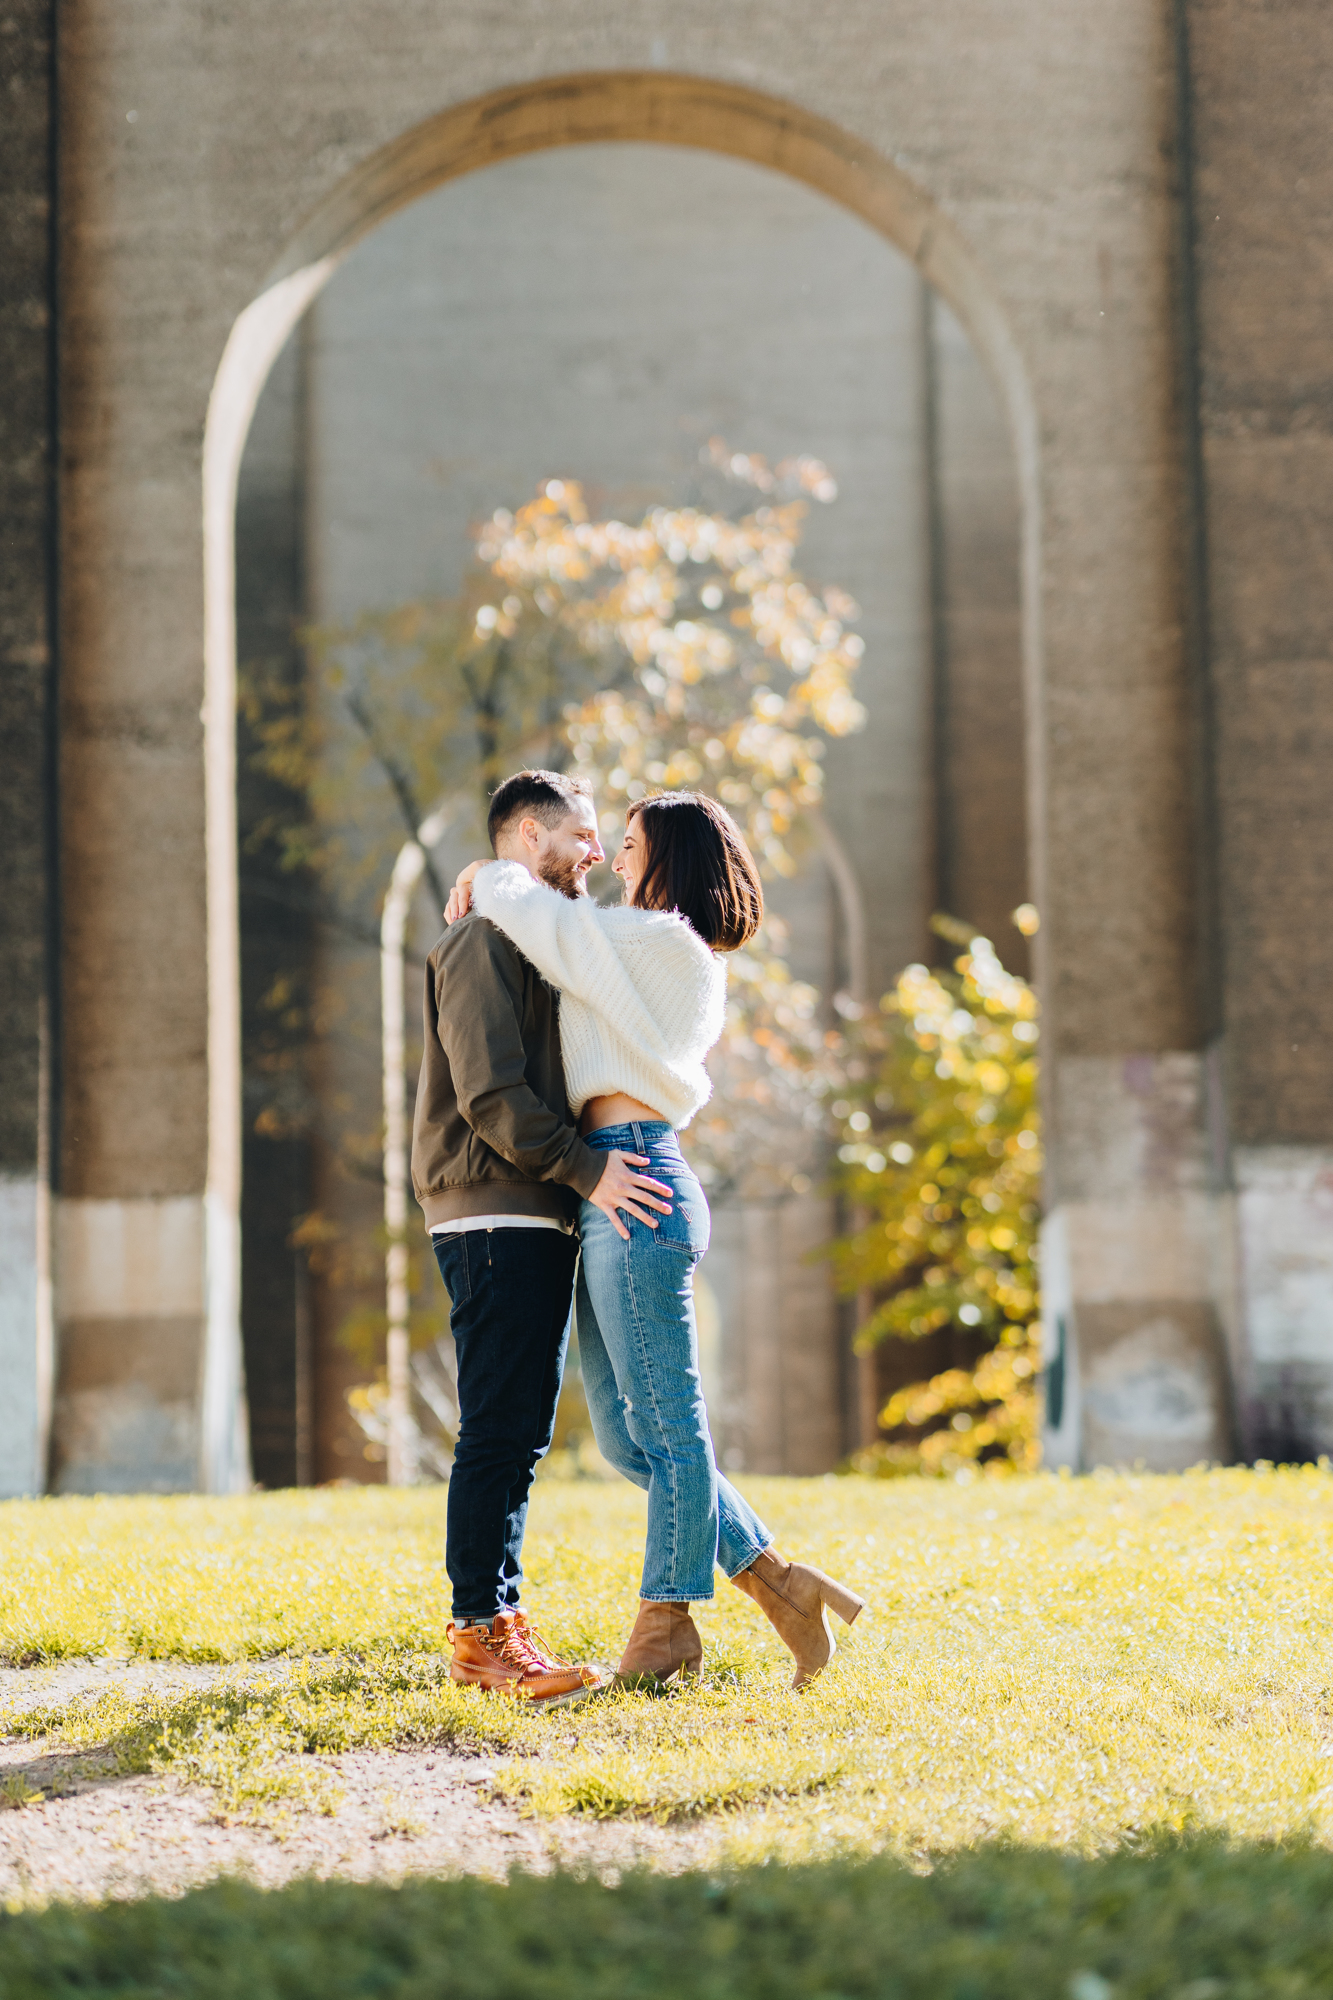 Lovely Fall Engagement Photos in Astoria Park, Queens, New York